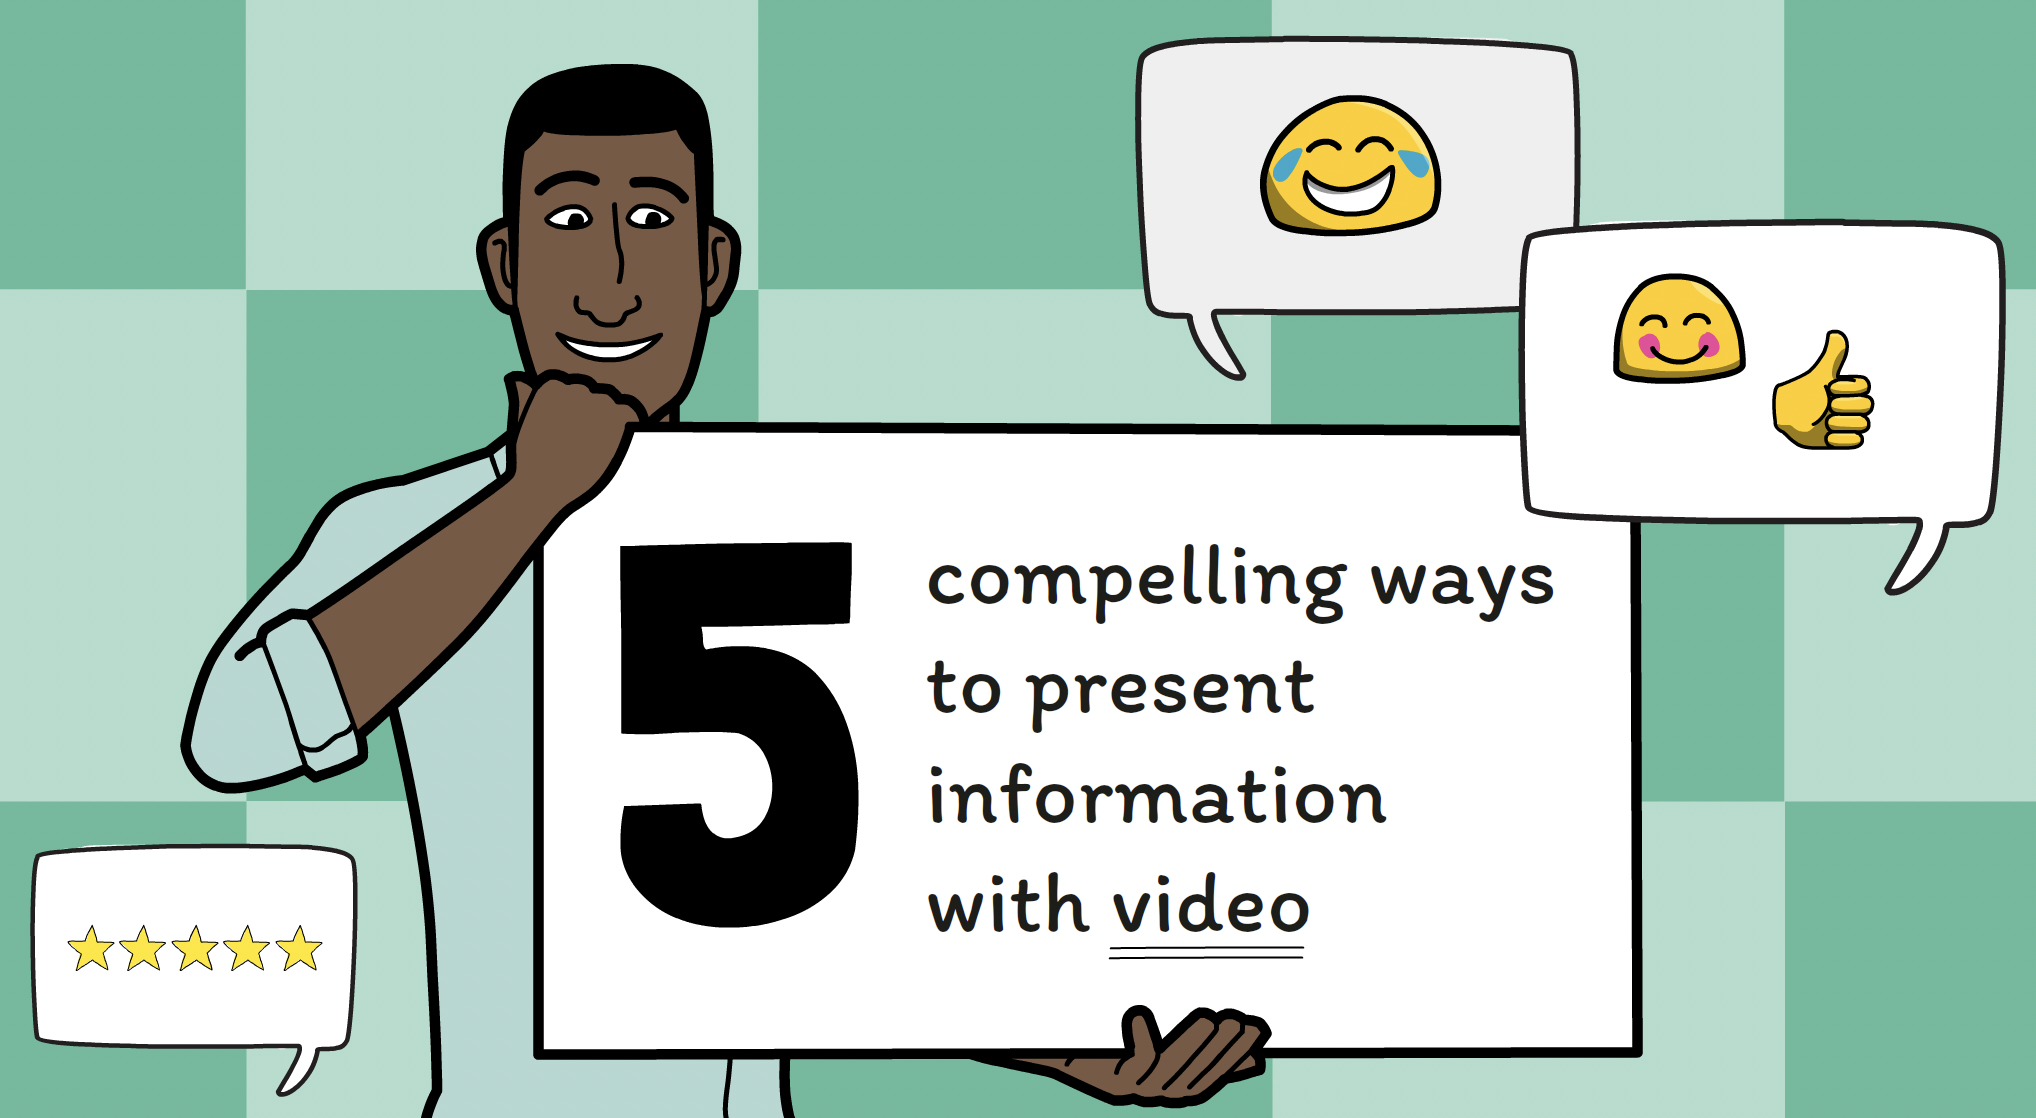 5 compelling ways to present information with video